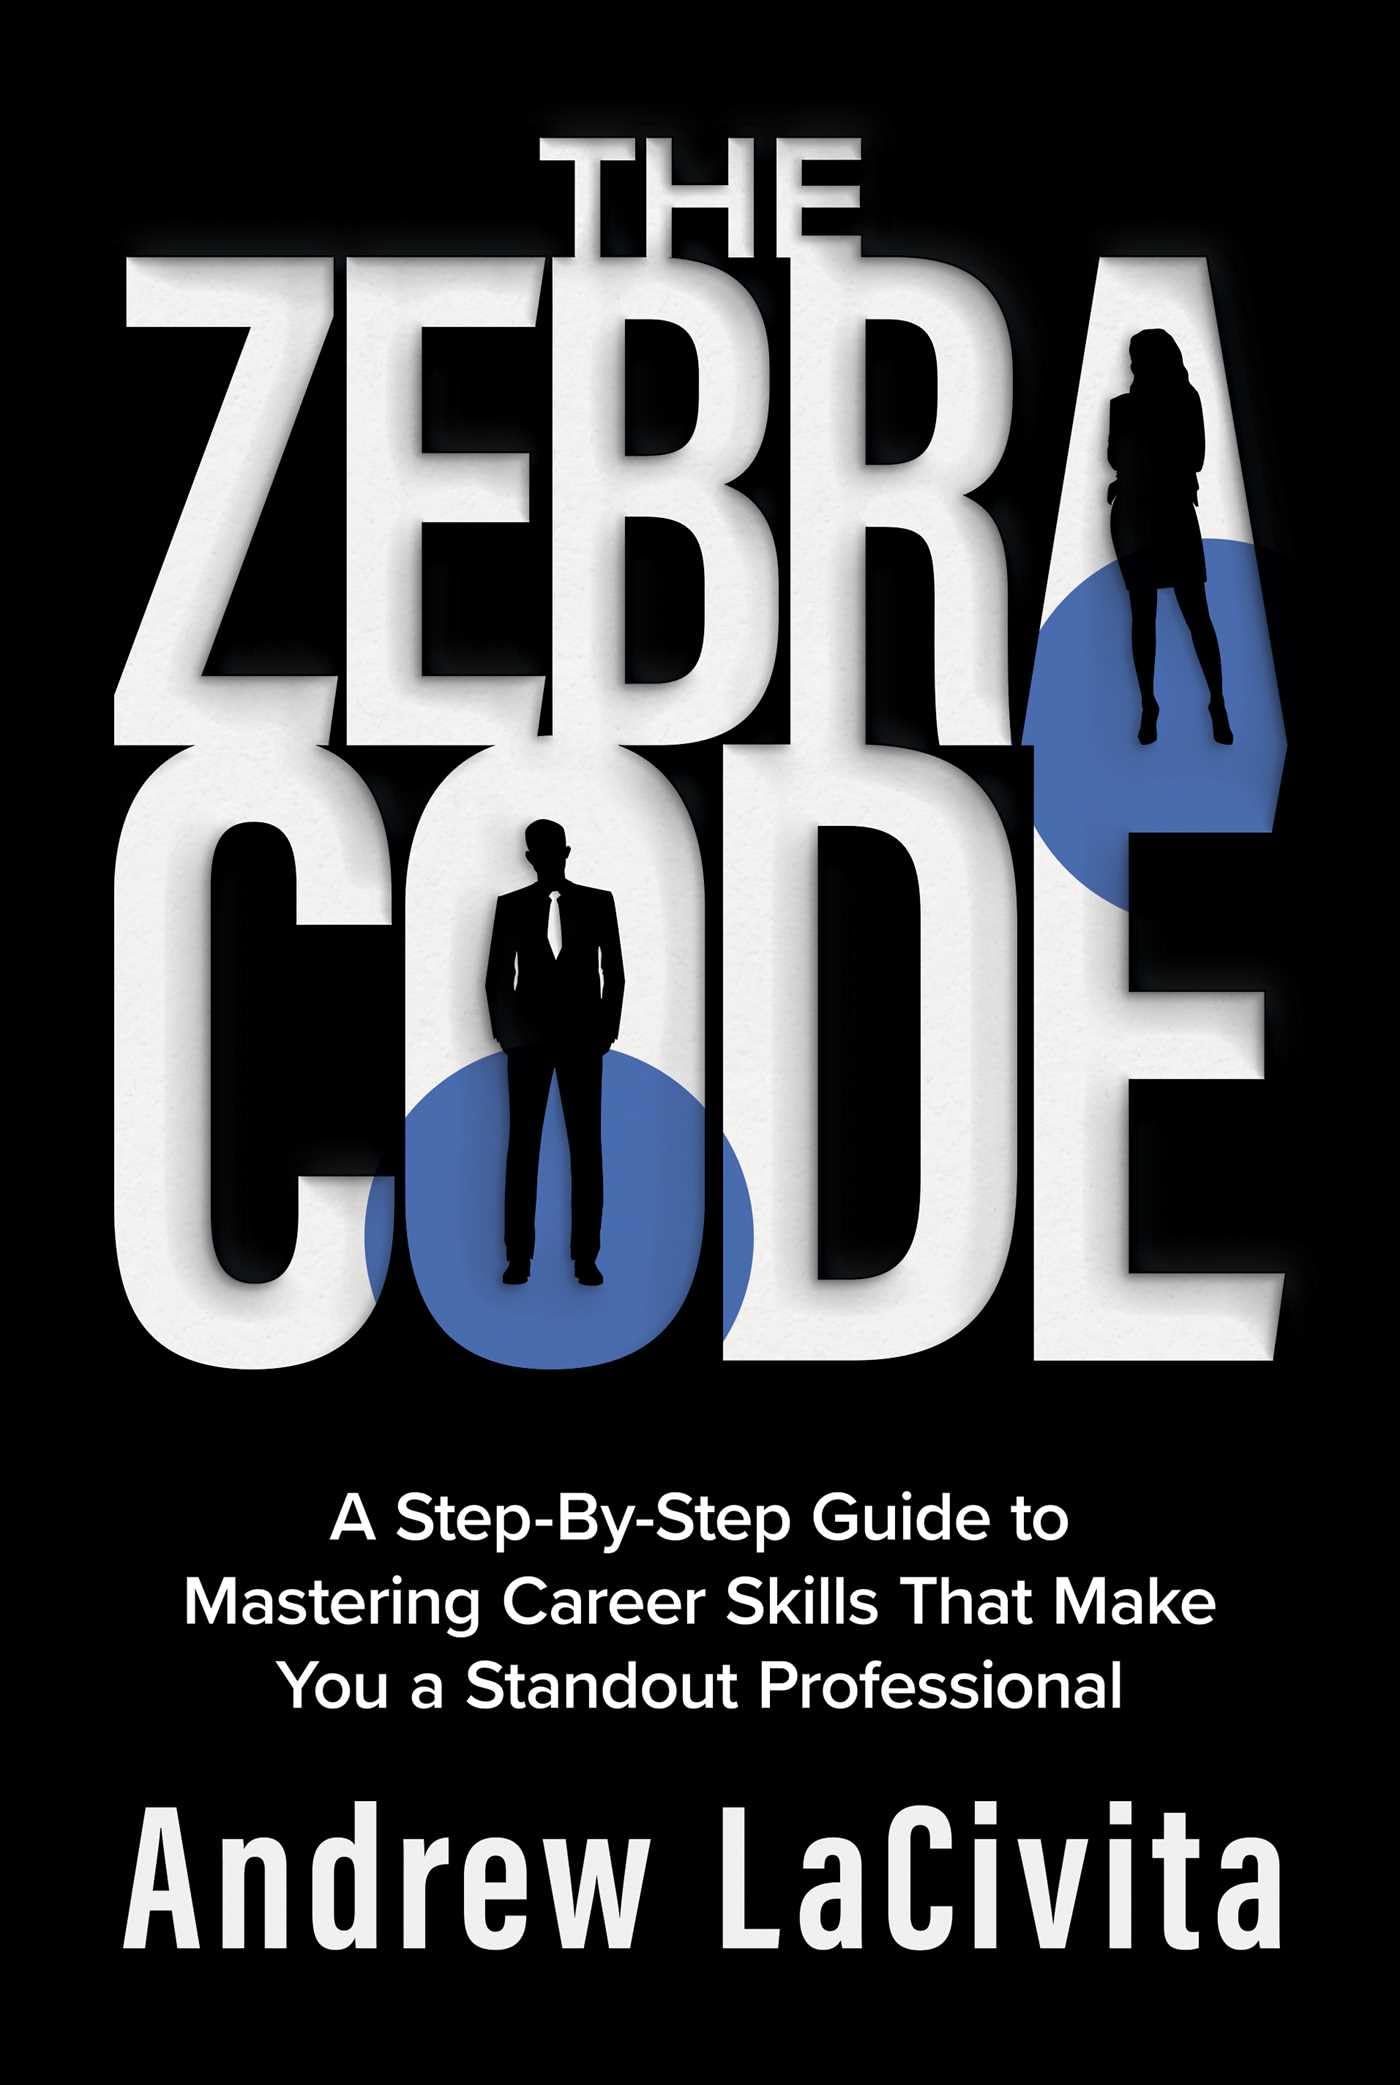 The Zebra Code: A Step-By-Step Guide to Mastering Career Skills That Make You a Standout Professional